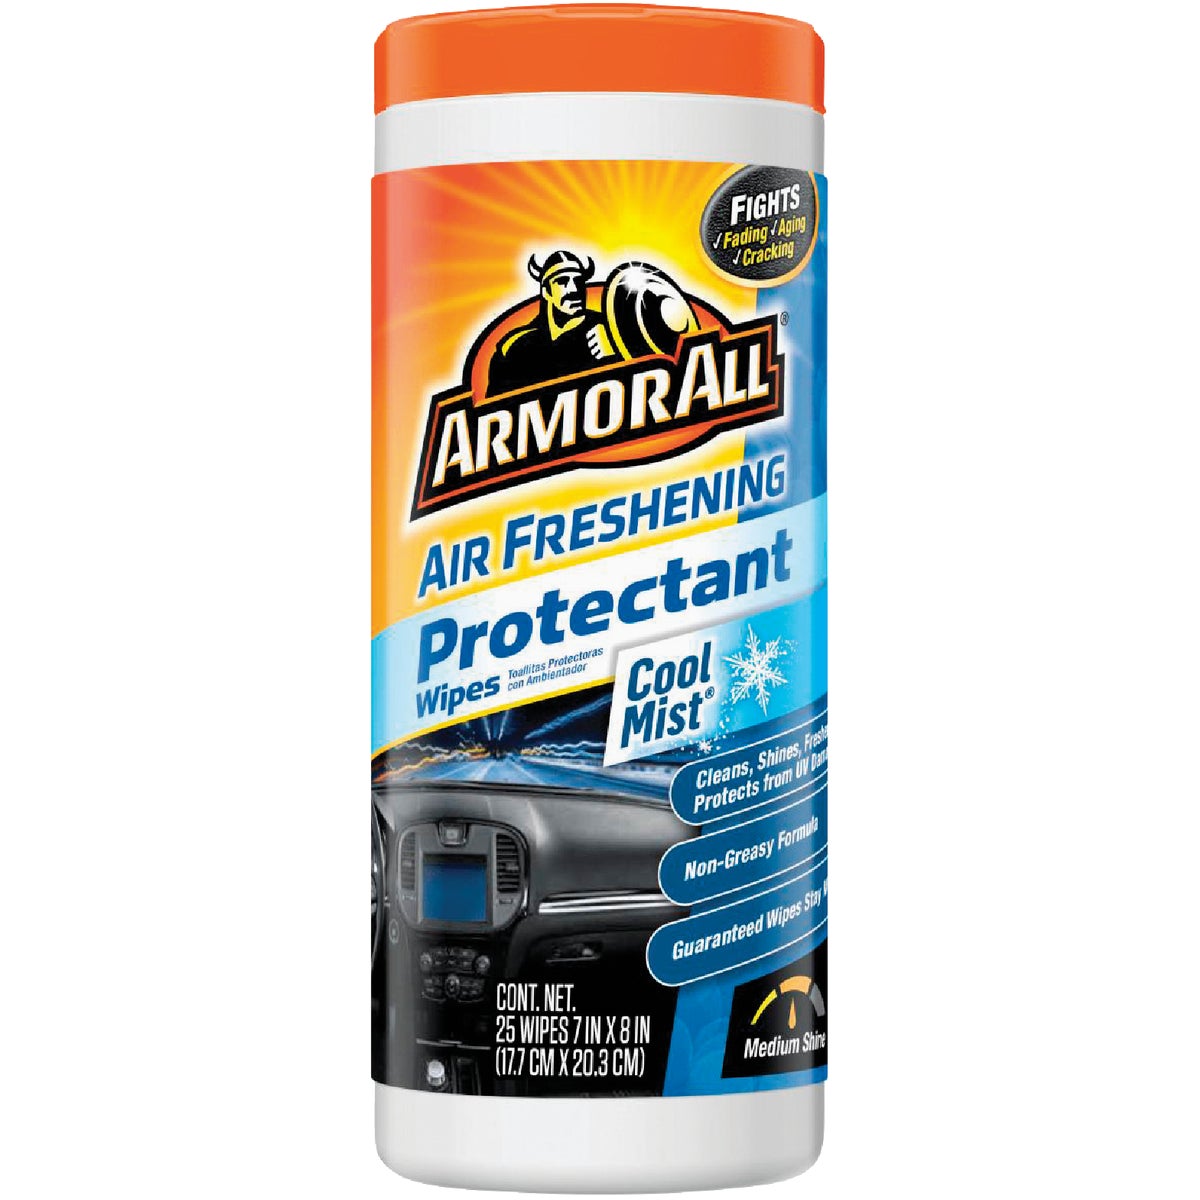 Armor All Cool Mist Scent Air Freshening Protectant Wipe (25- Count)